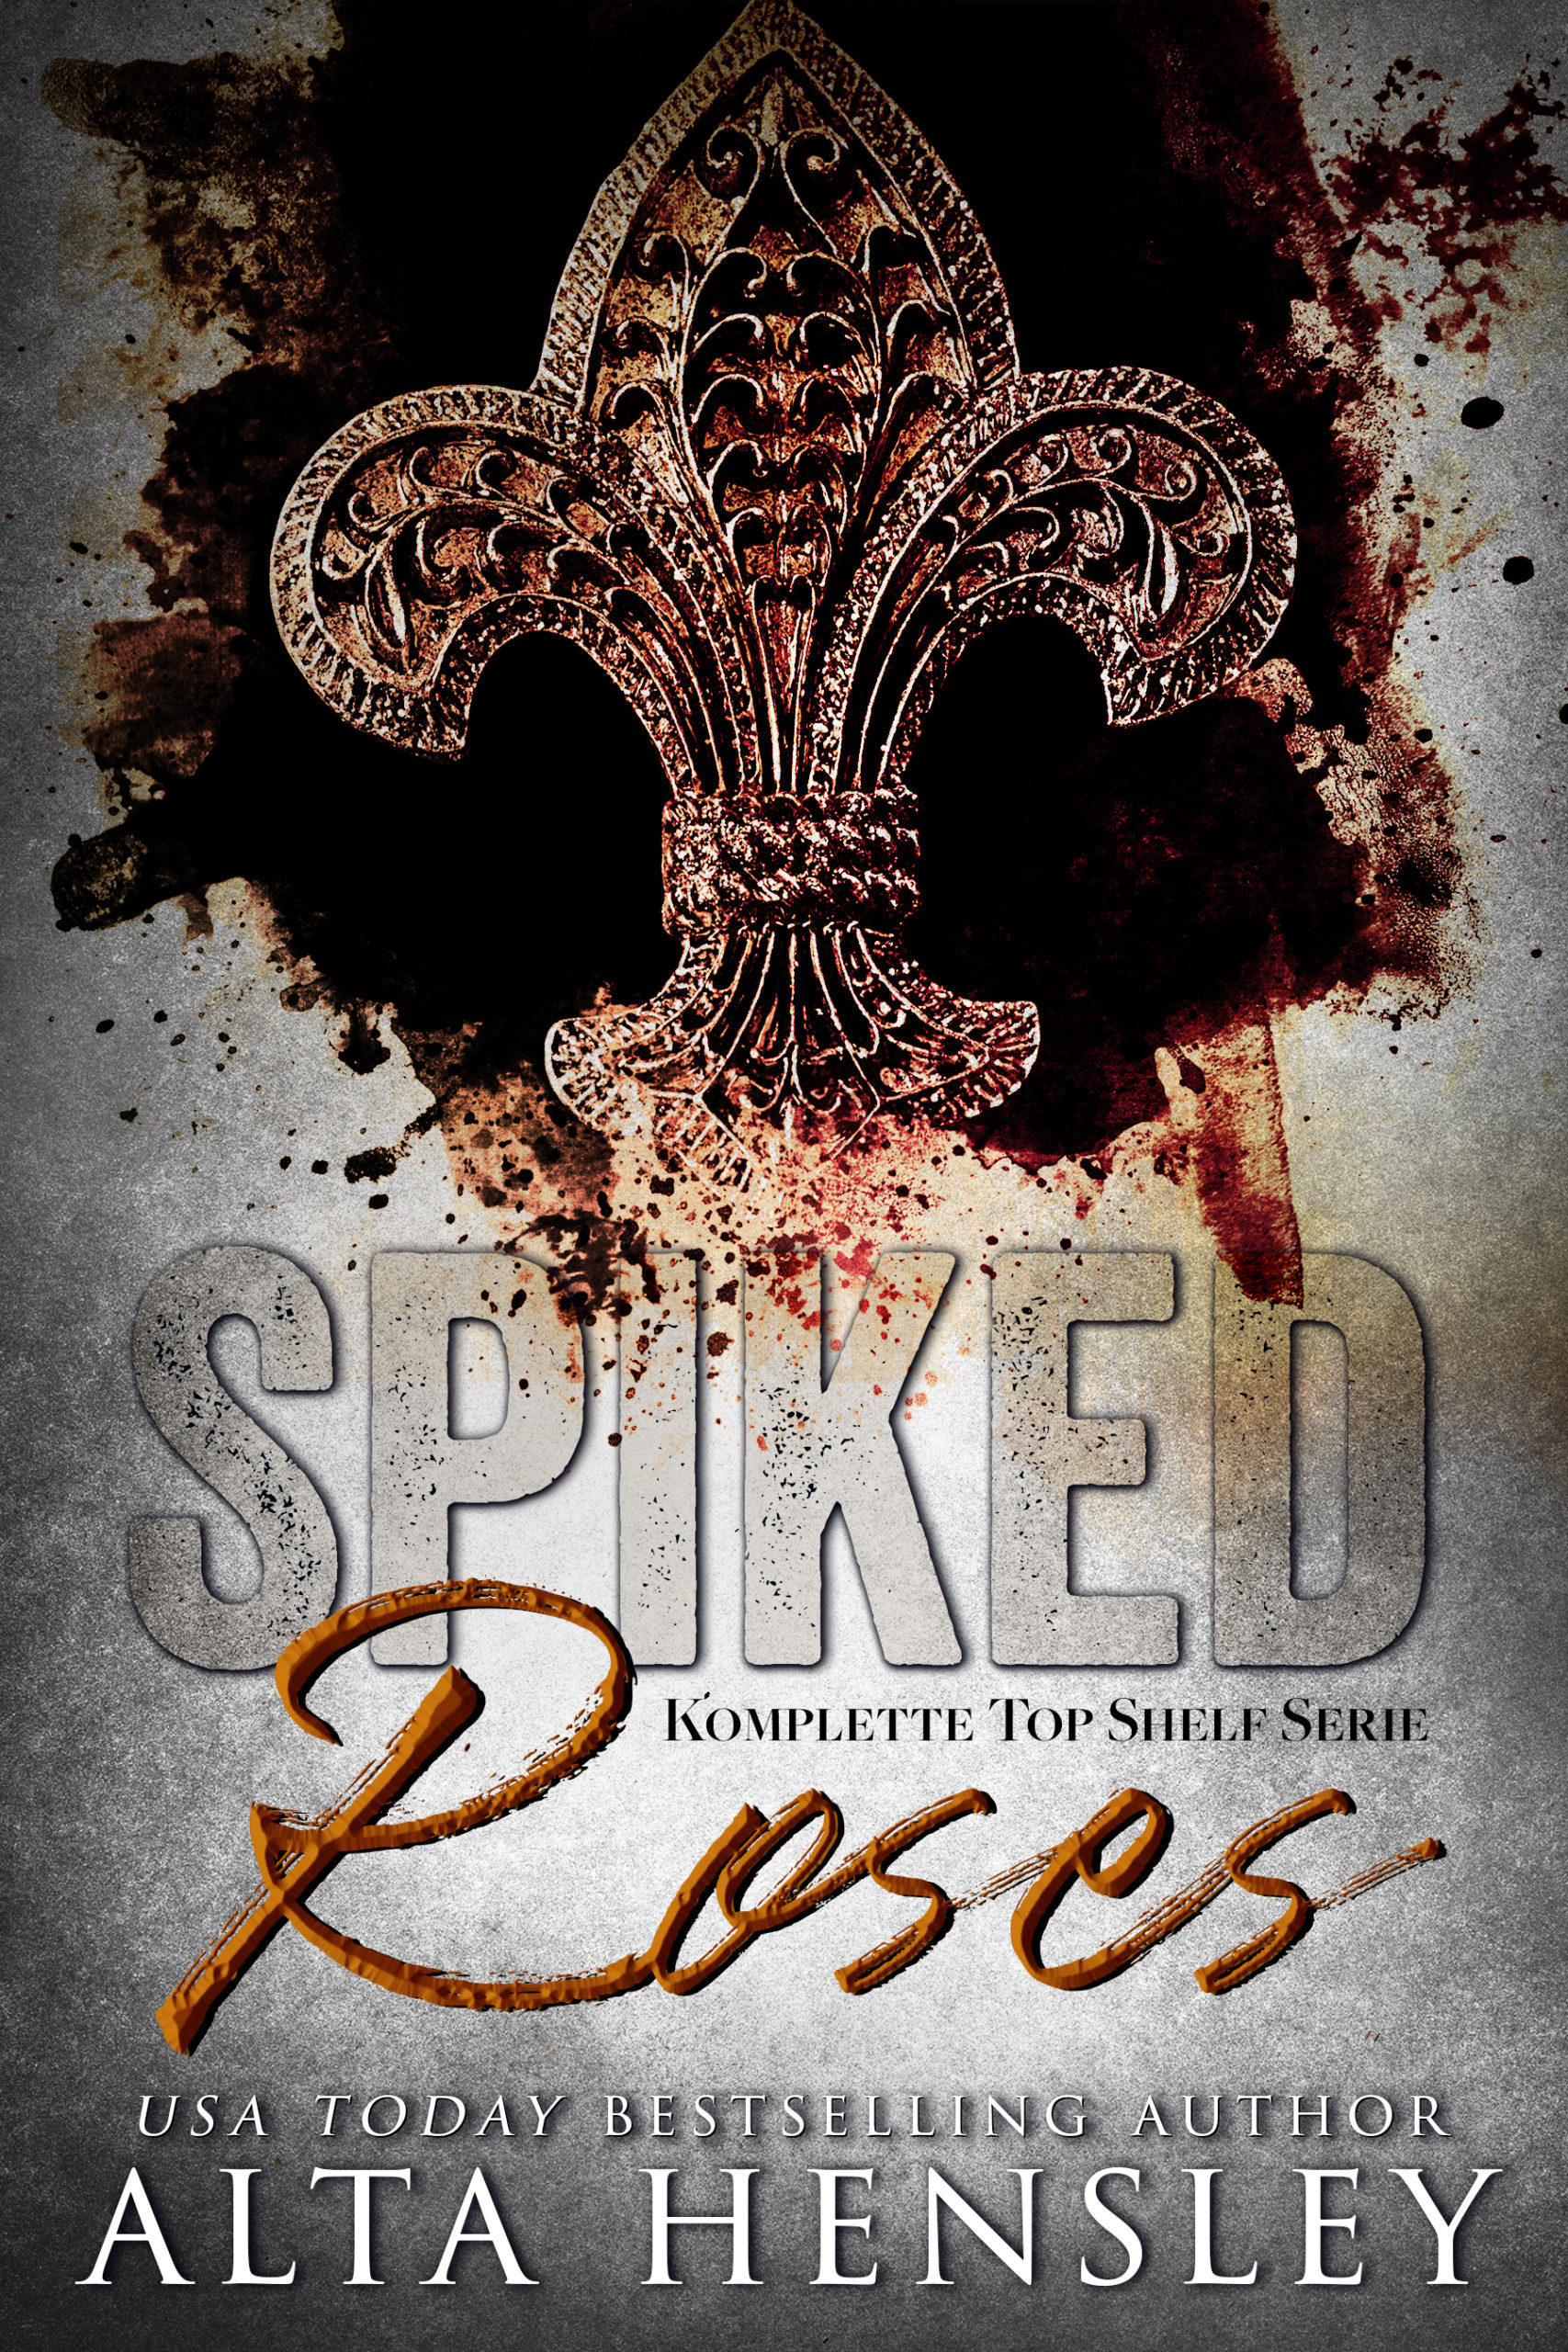 Book Cover: Spiked Roses: Komplette Top Shelf Serie